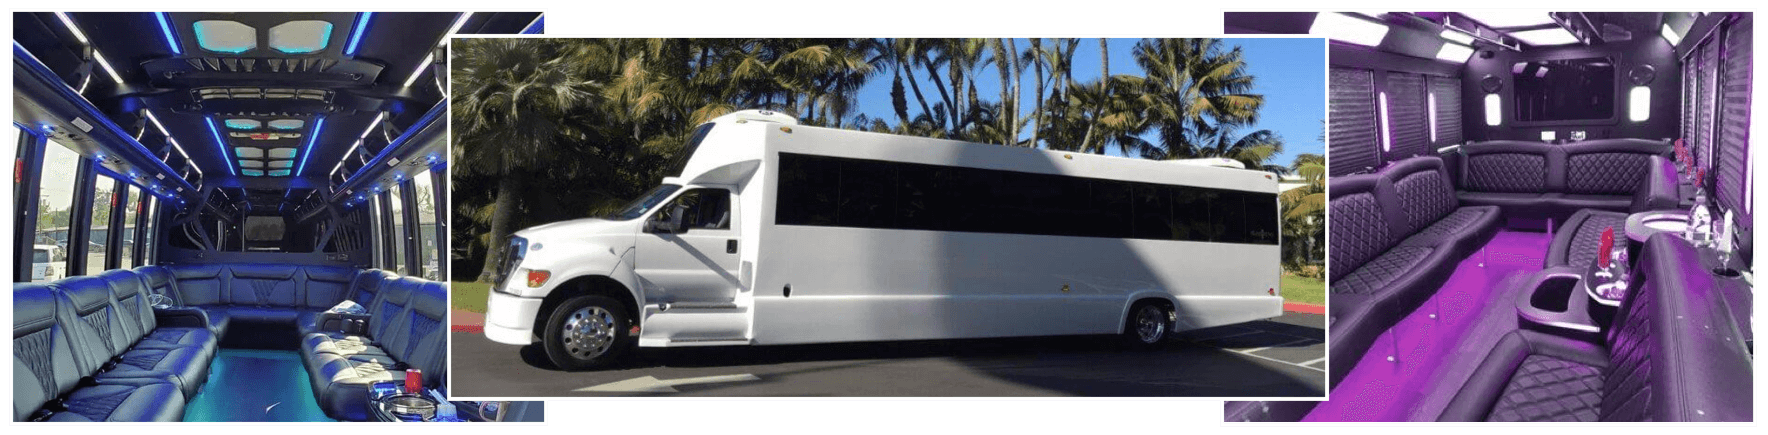 party bus rental pacific beach 92109